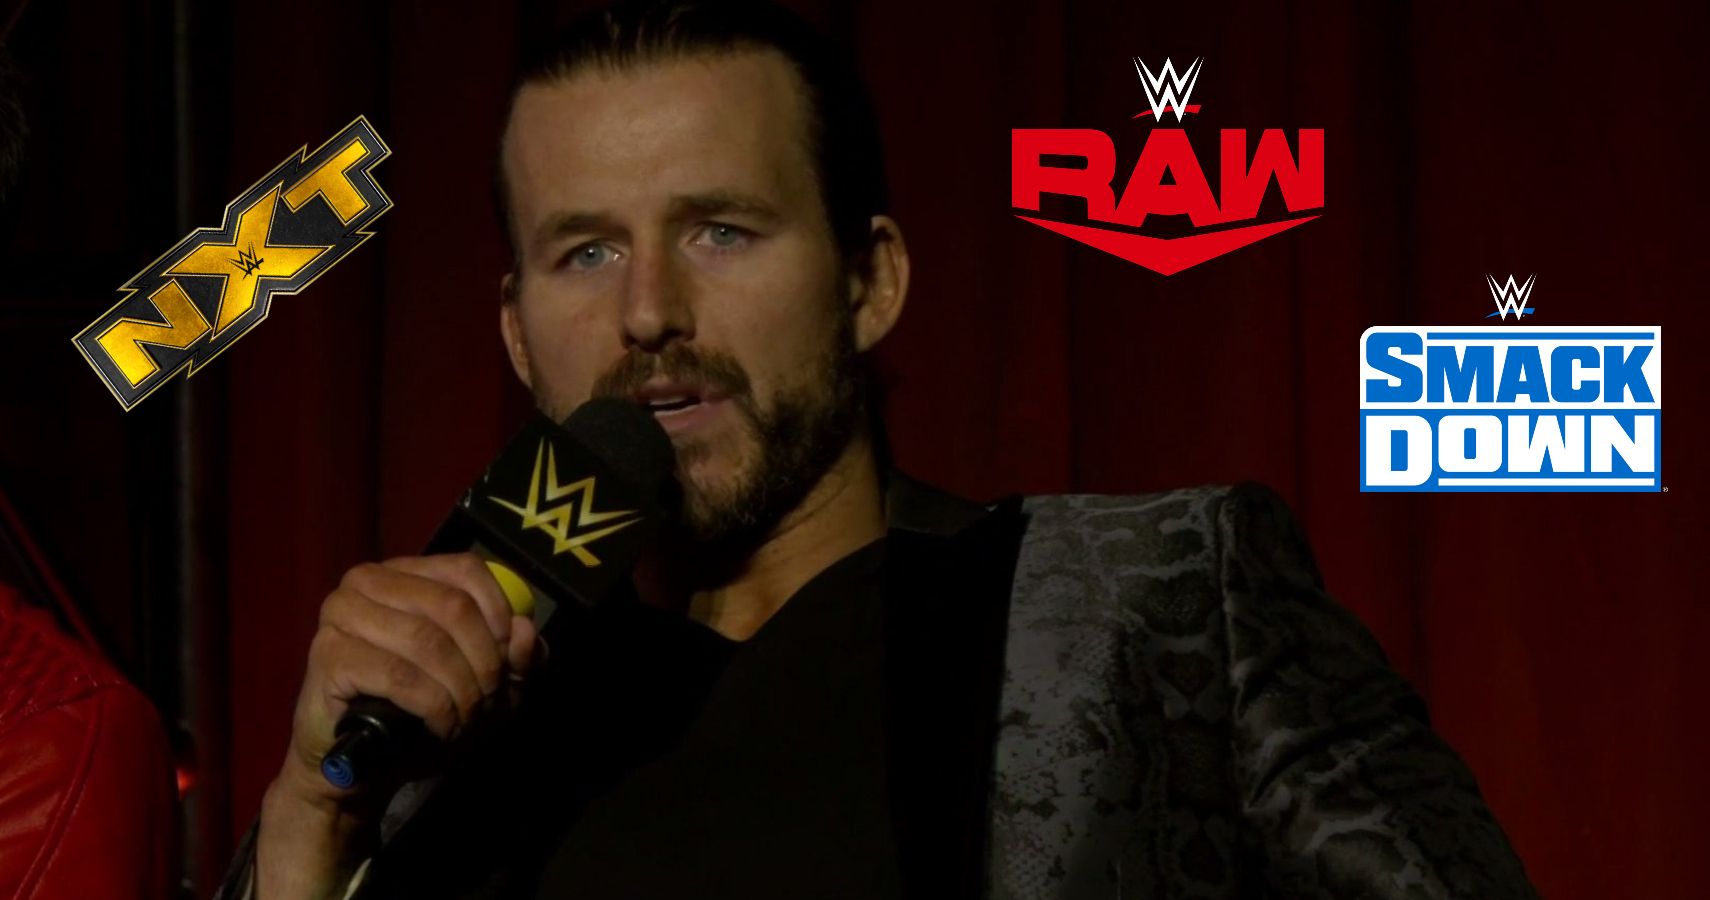 WWE NXT Superstar Adam Cole during the NXT TakeOver: In Your House global press conference